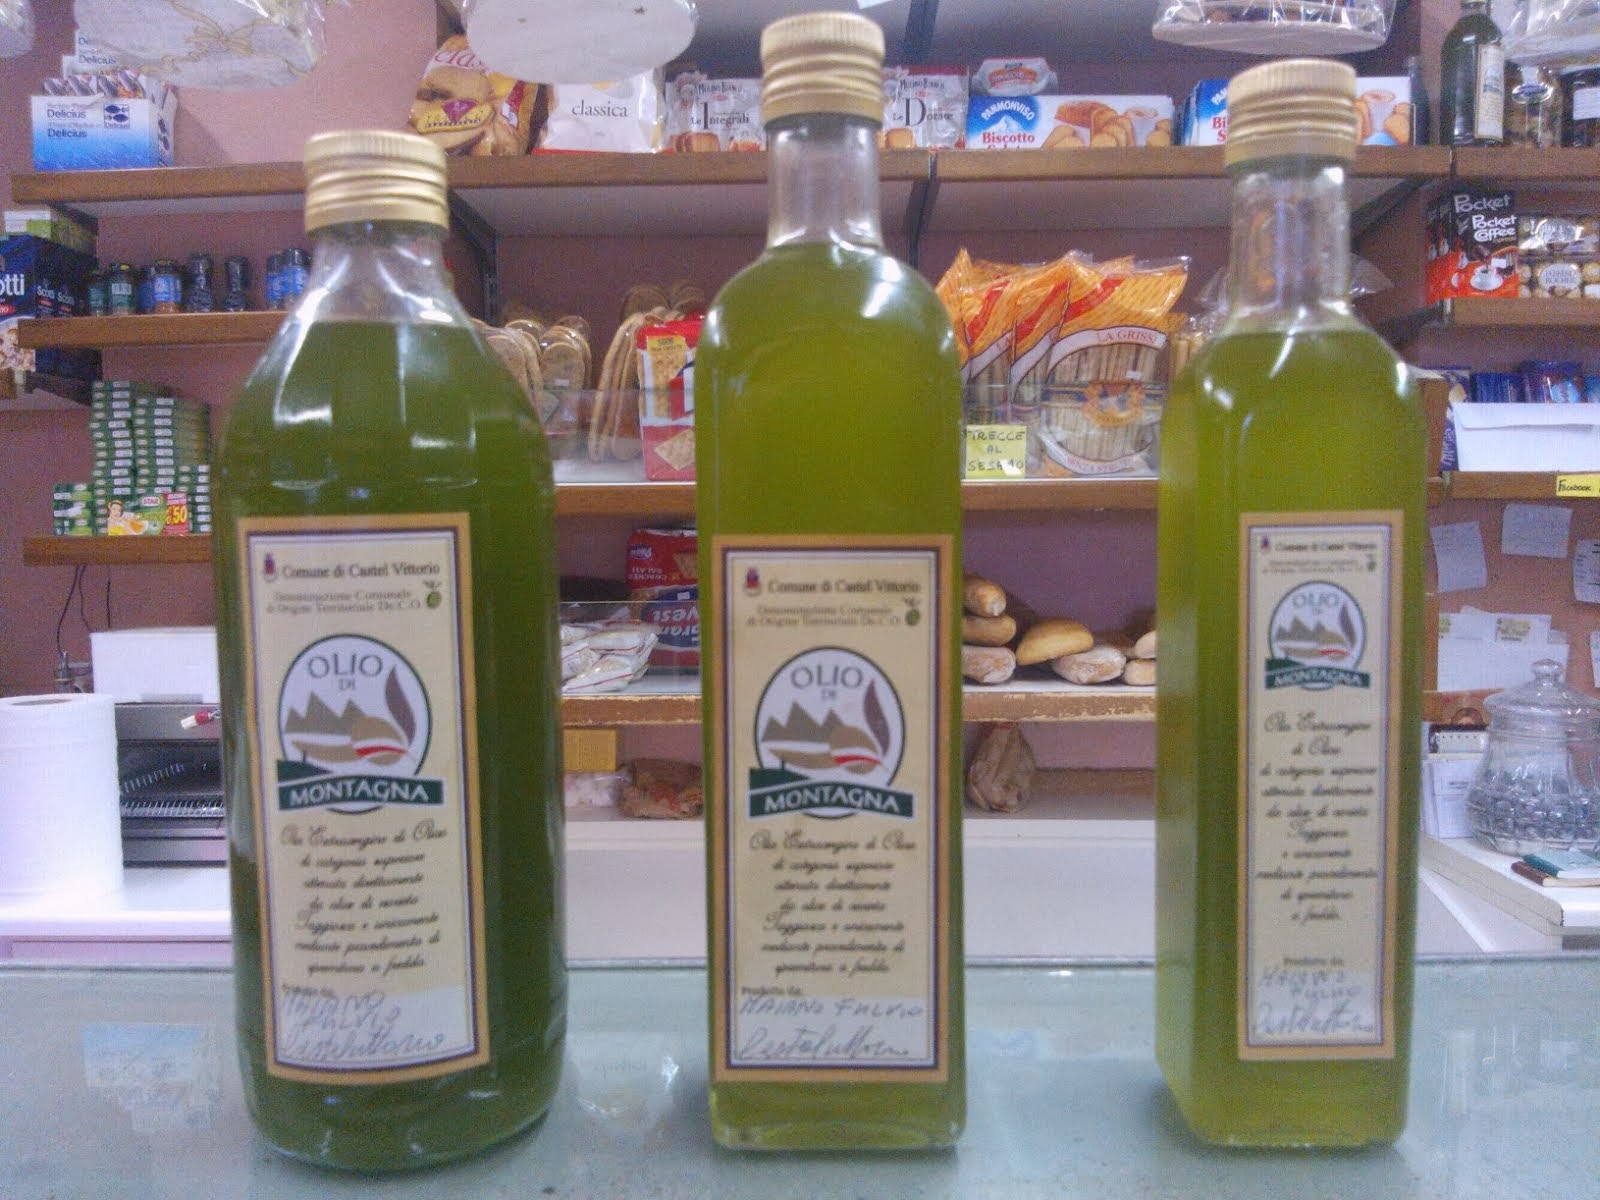 Extra Virgin Oil of Taggiasca Olive